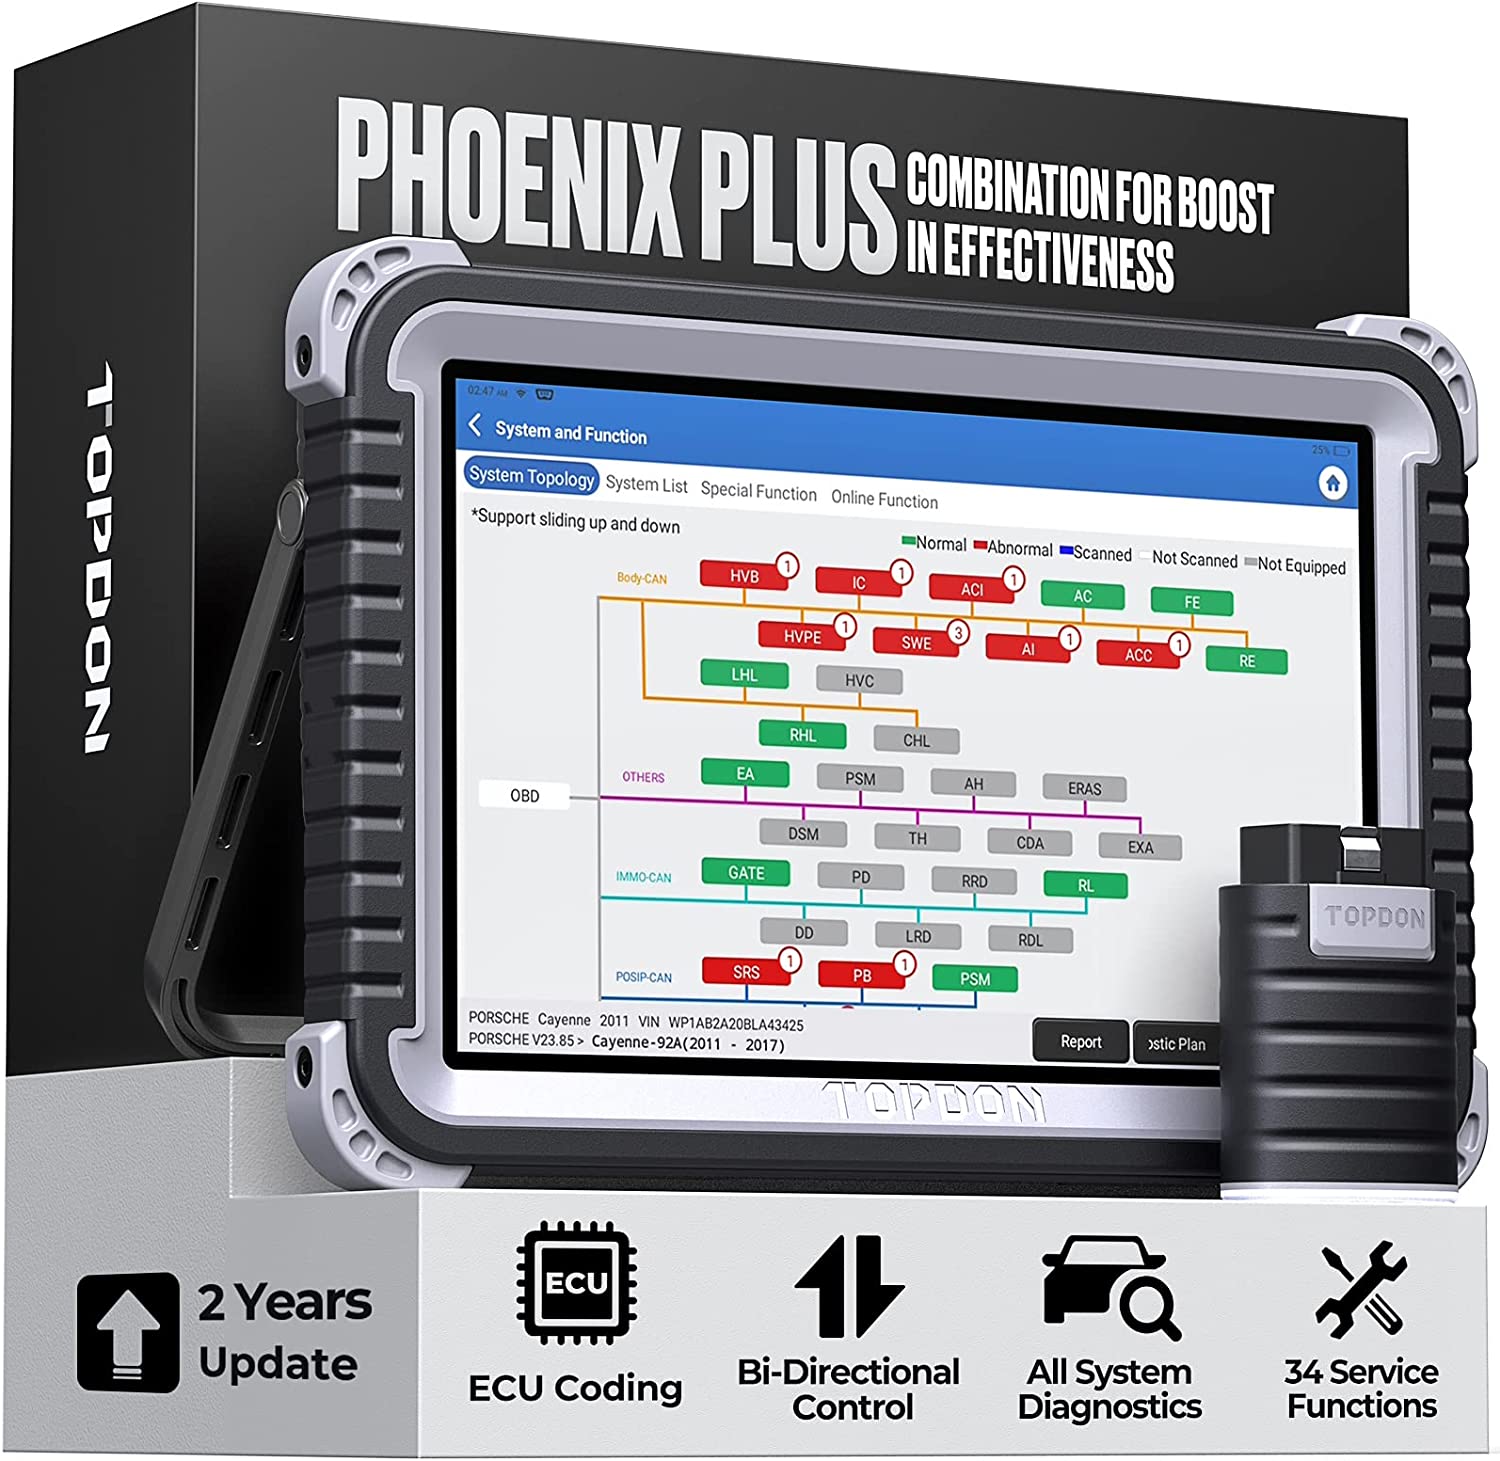 TOPDON Phoenix Plus Car Diagnostic Scan Tool Bidirectional Advanced ECU Coding, Key Matching, AutoAuth for FCA SGW 35+ Service 2 Years Free Update